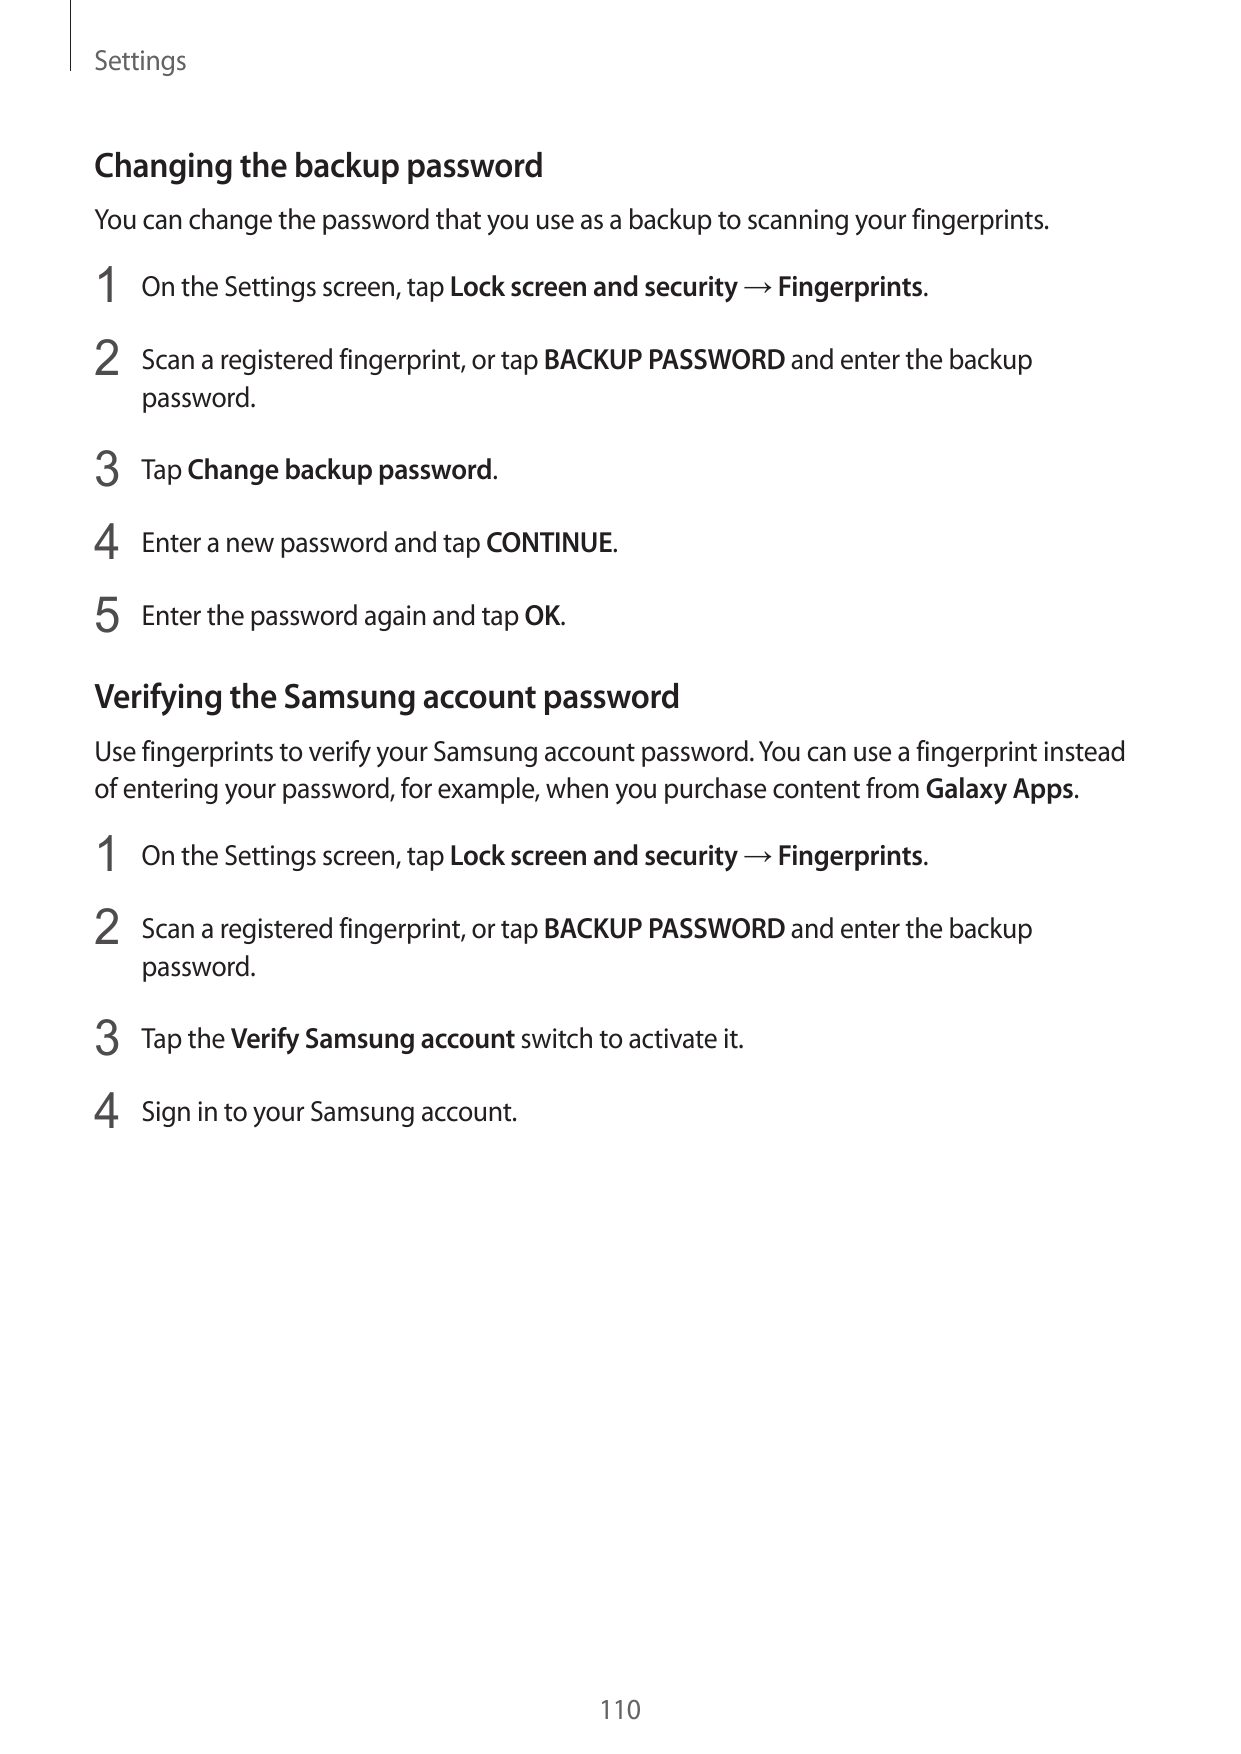 SettingsChanging the backup passwordYou can change the password that you use as a backup to scanning your fingerprints.1 On the 